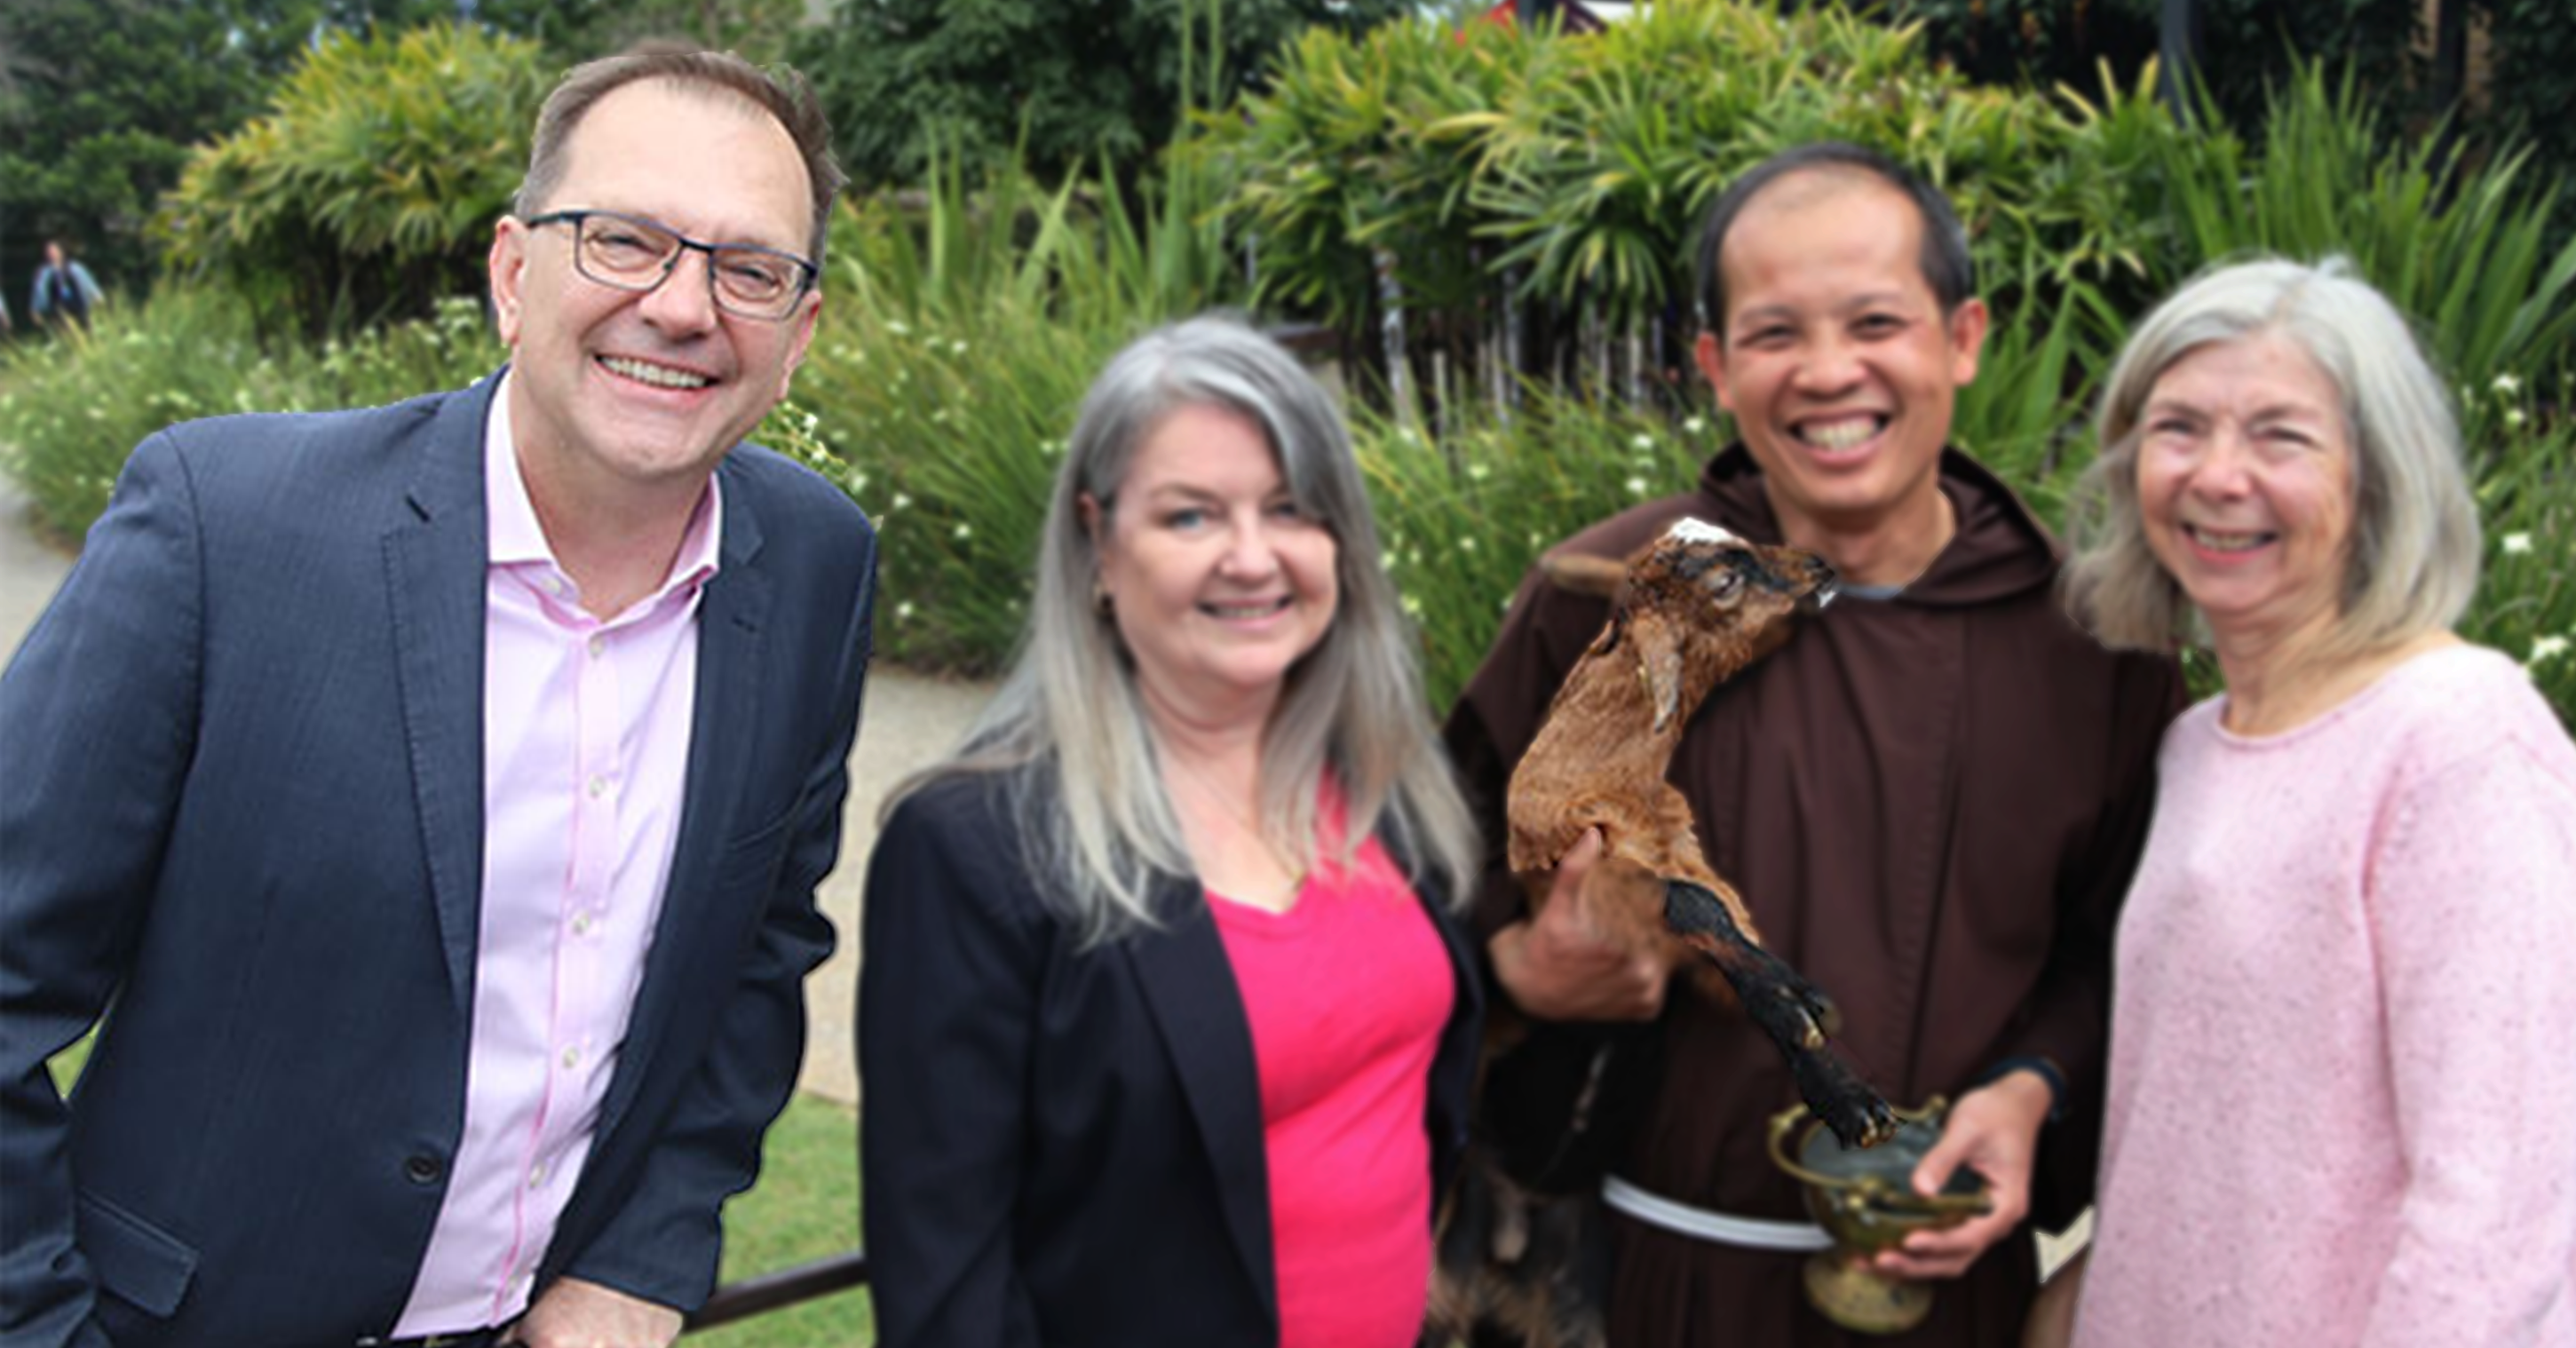 ACU Vice-Chancellor and President Zlatko Skribis posing with other people and a baby goat